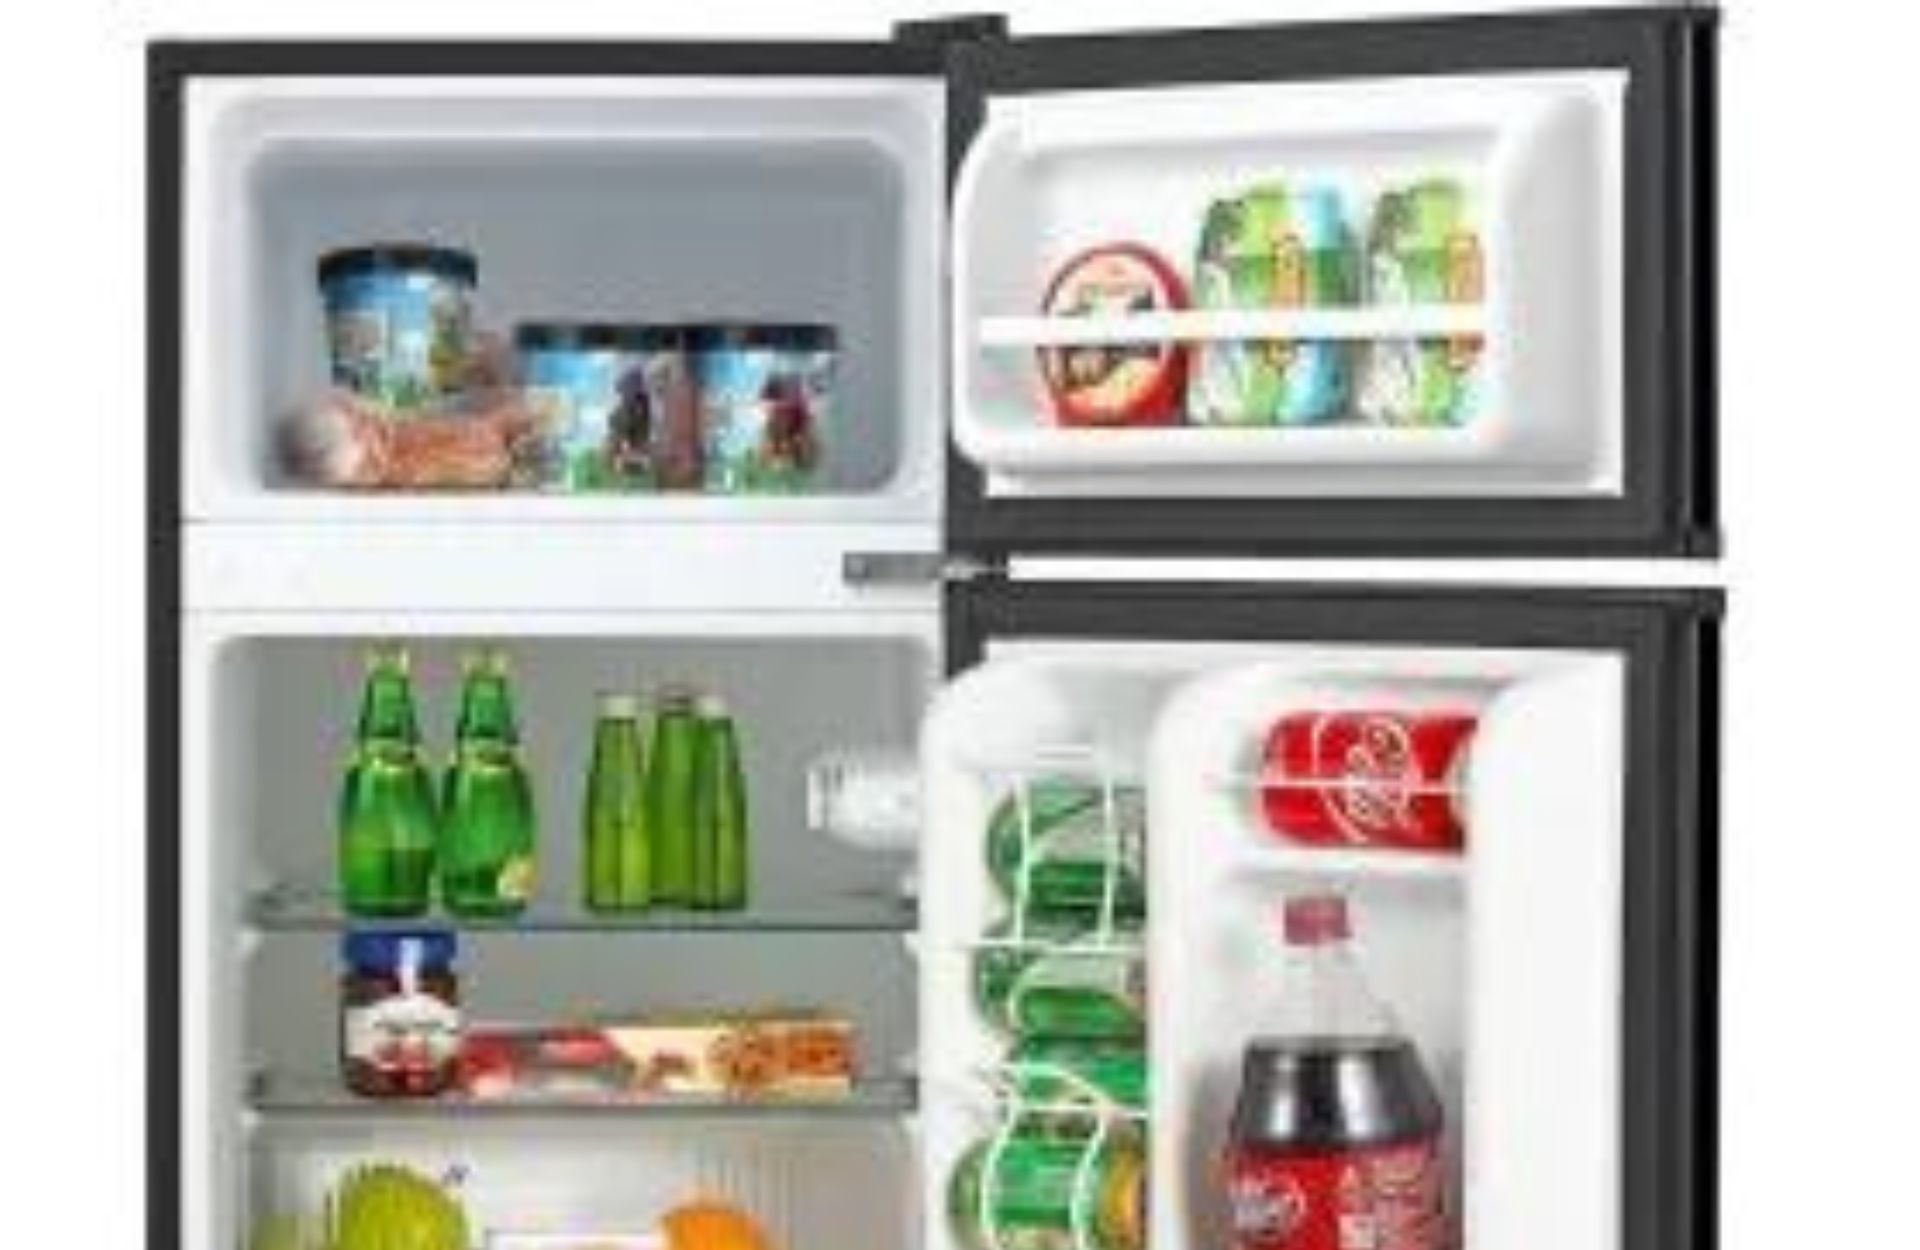 Efficient Living: Small Footprint Fridge and Sustainable Solutions